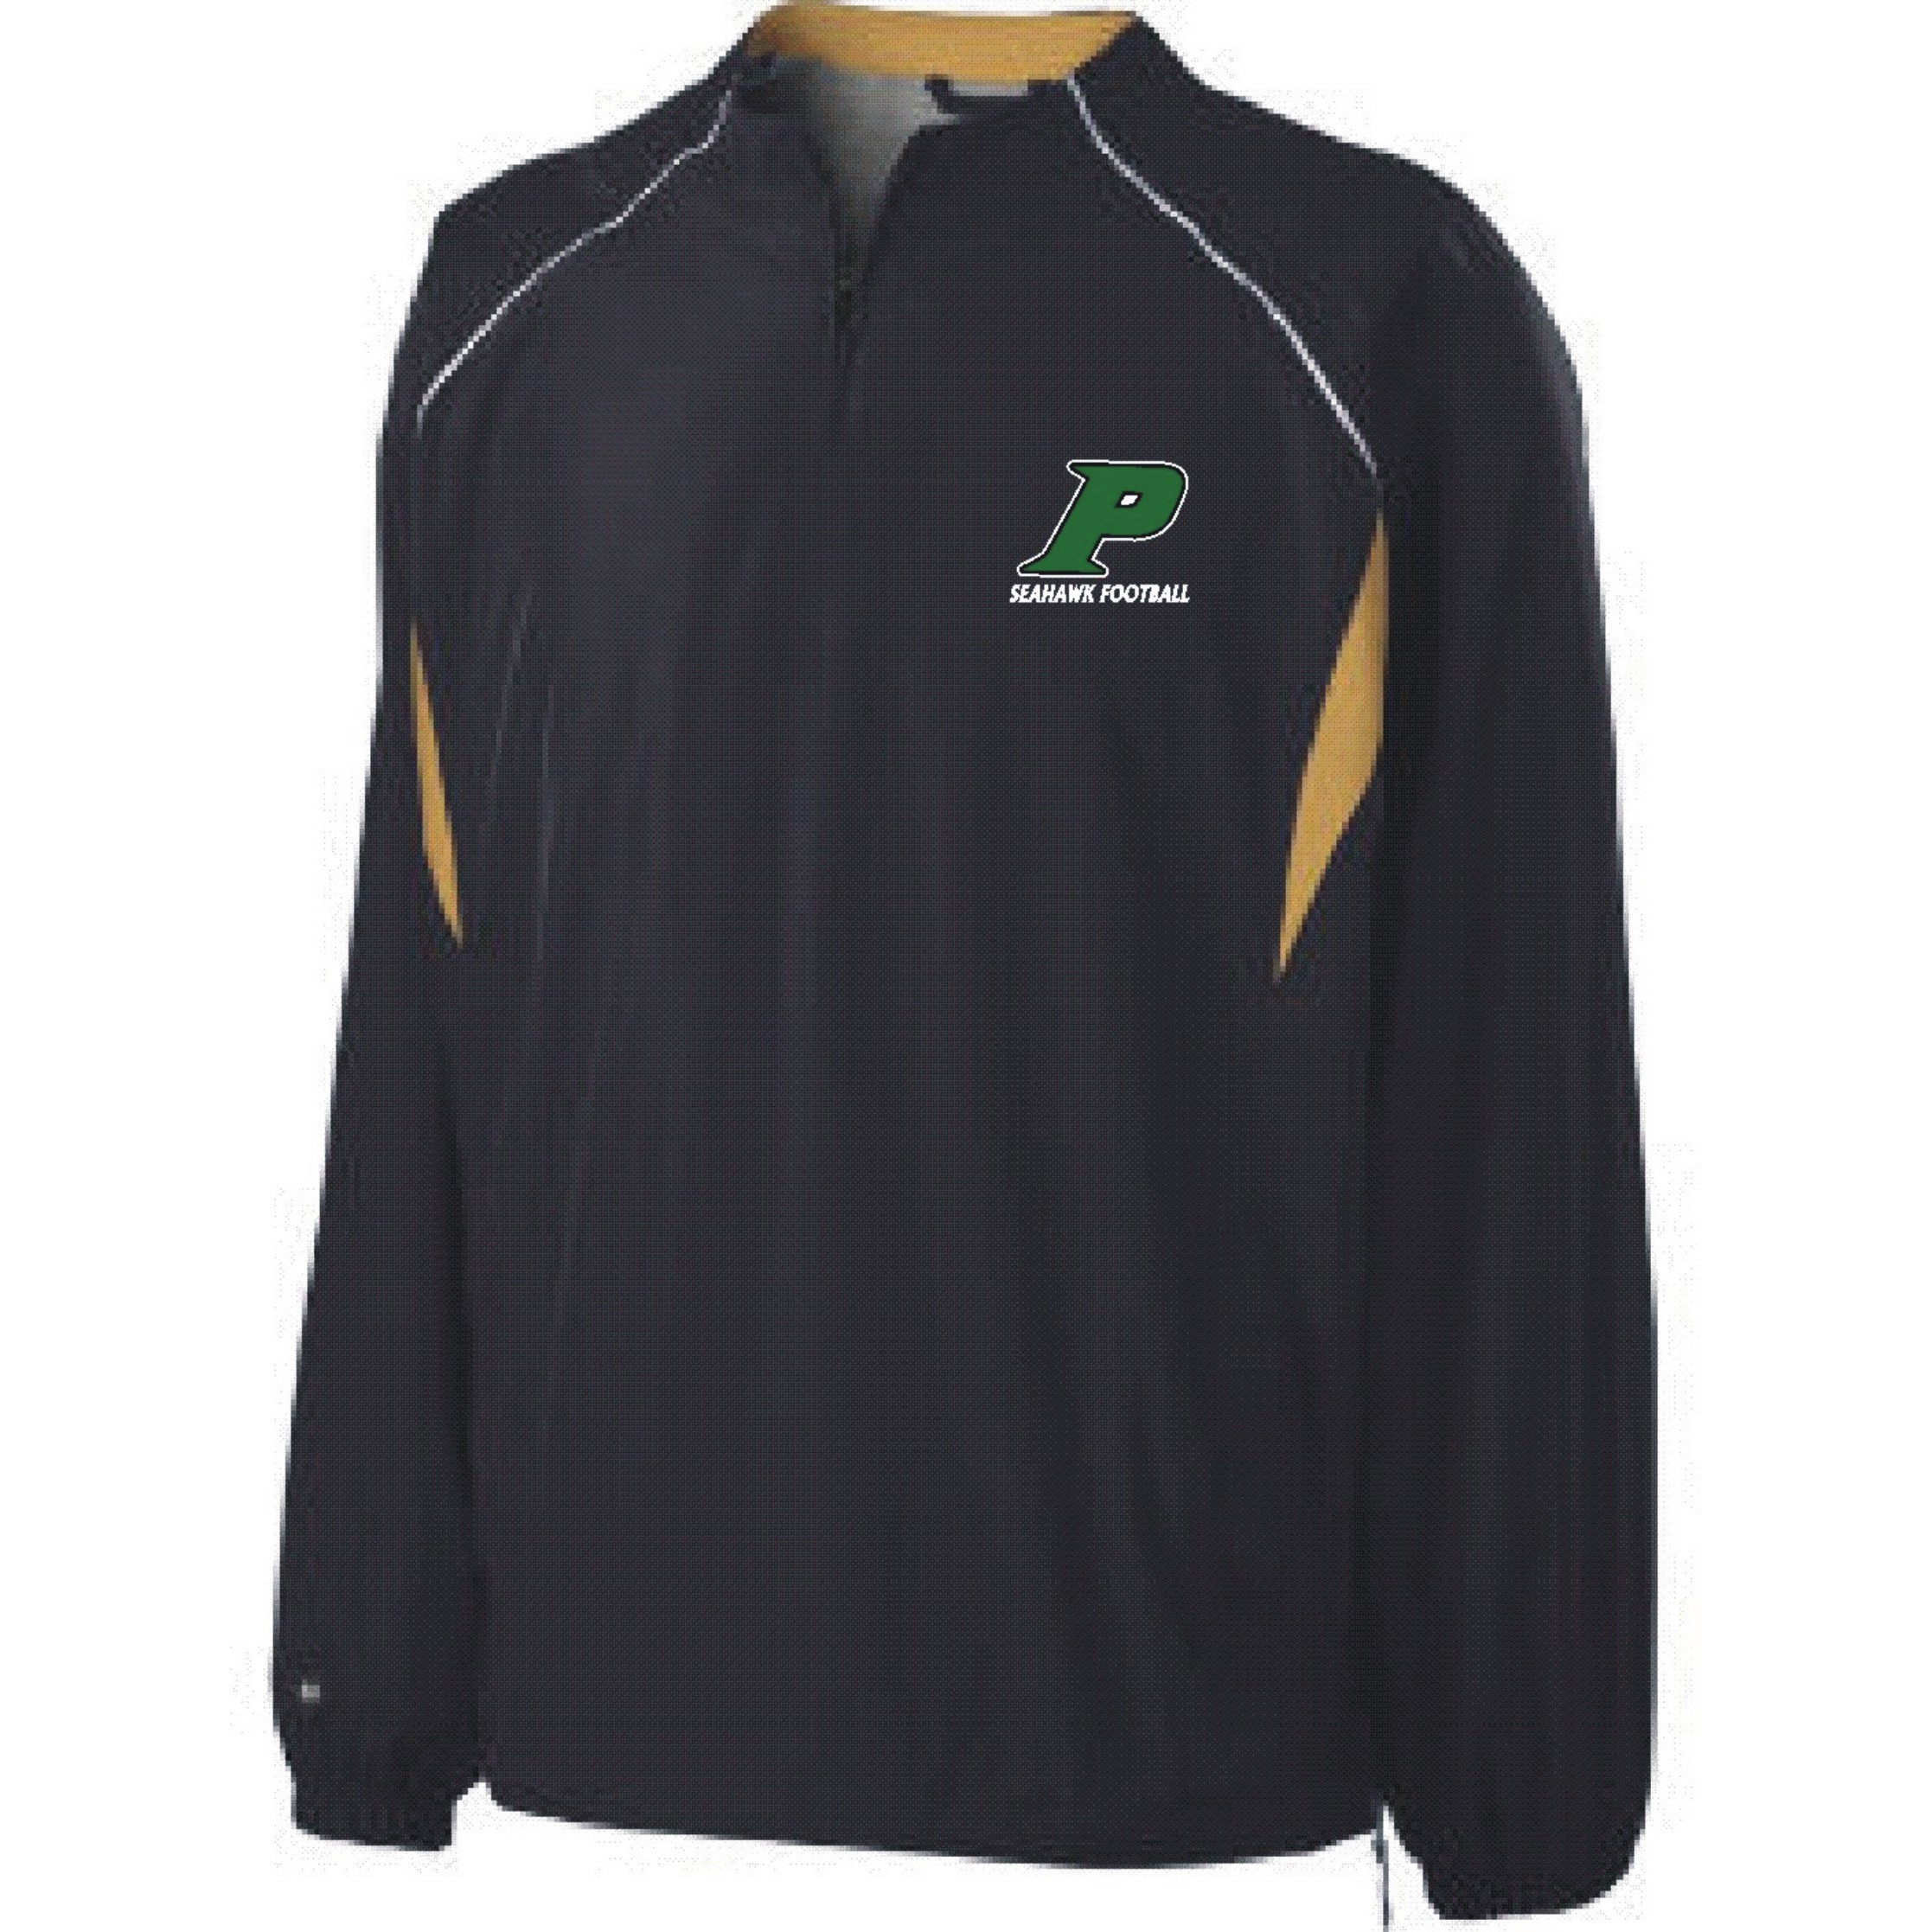 Coaches Micron Polyester Windshirt